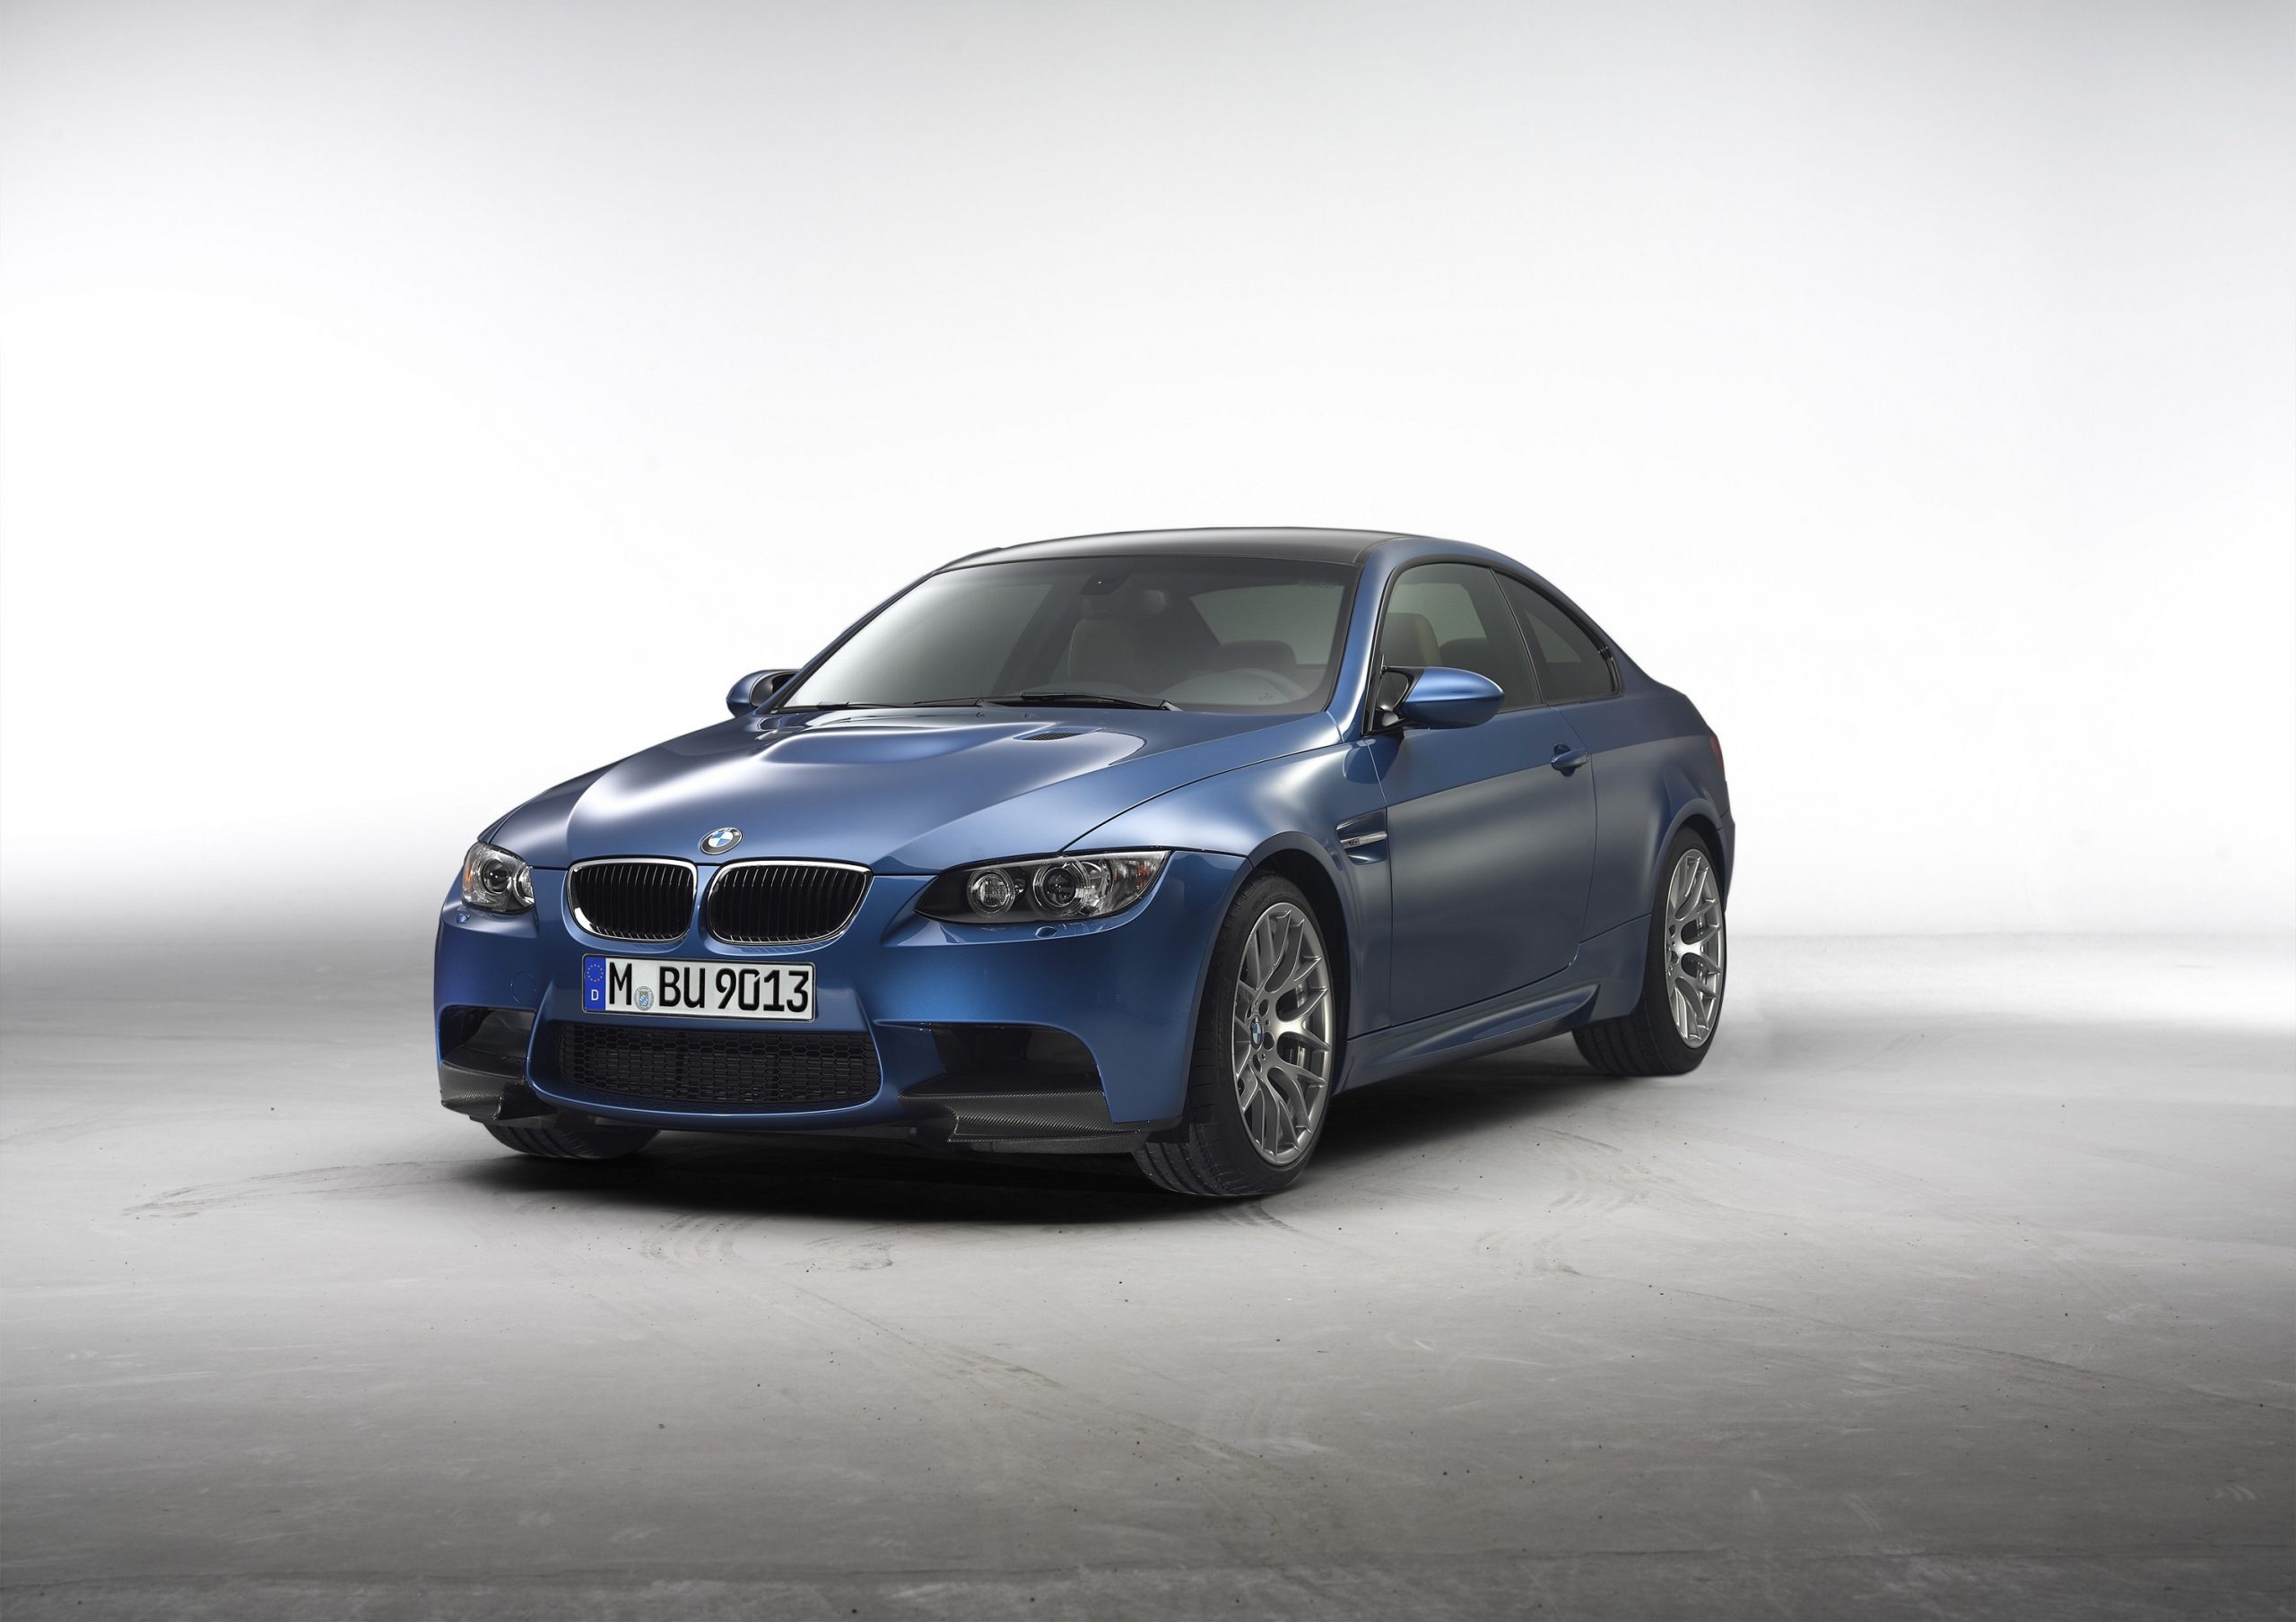 A dark blue E92 BMW M3 sports car shot from the front 3/4 in a photo booth